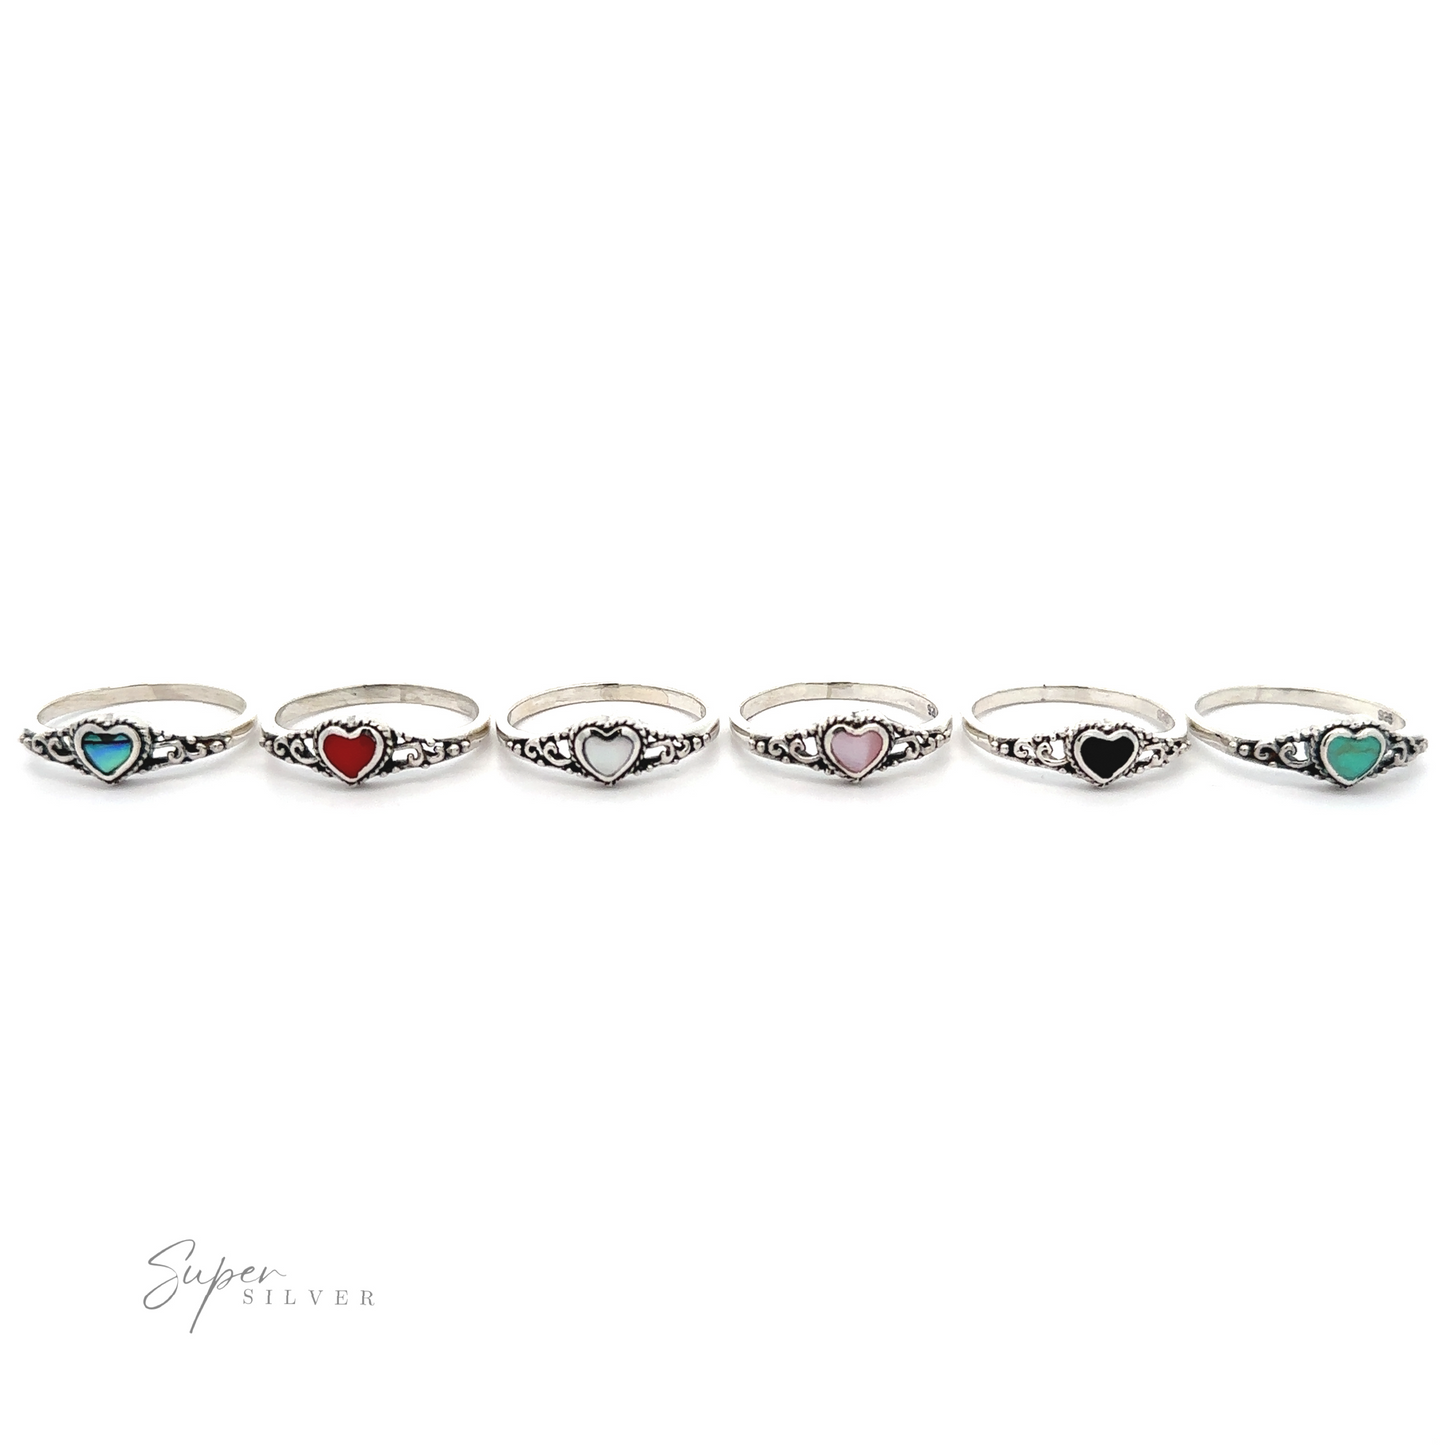 
                  
                    A row of Dainty Heart Filigree Rings with Inlaid Stones, each featuring a Bali-style filigree design with different colored stones.
                  
                